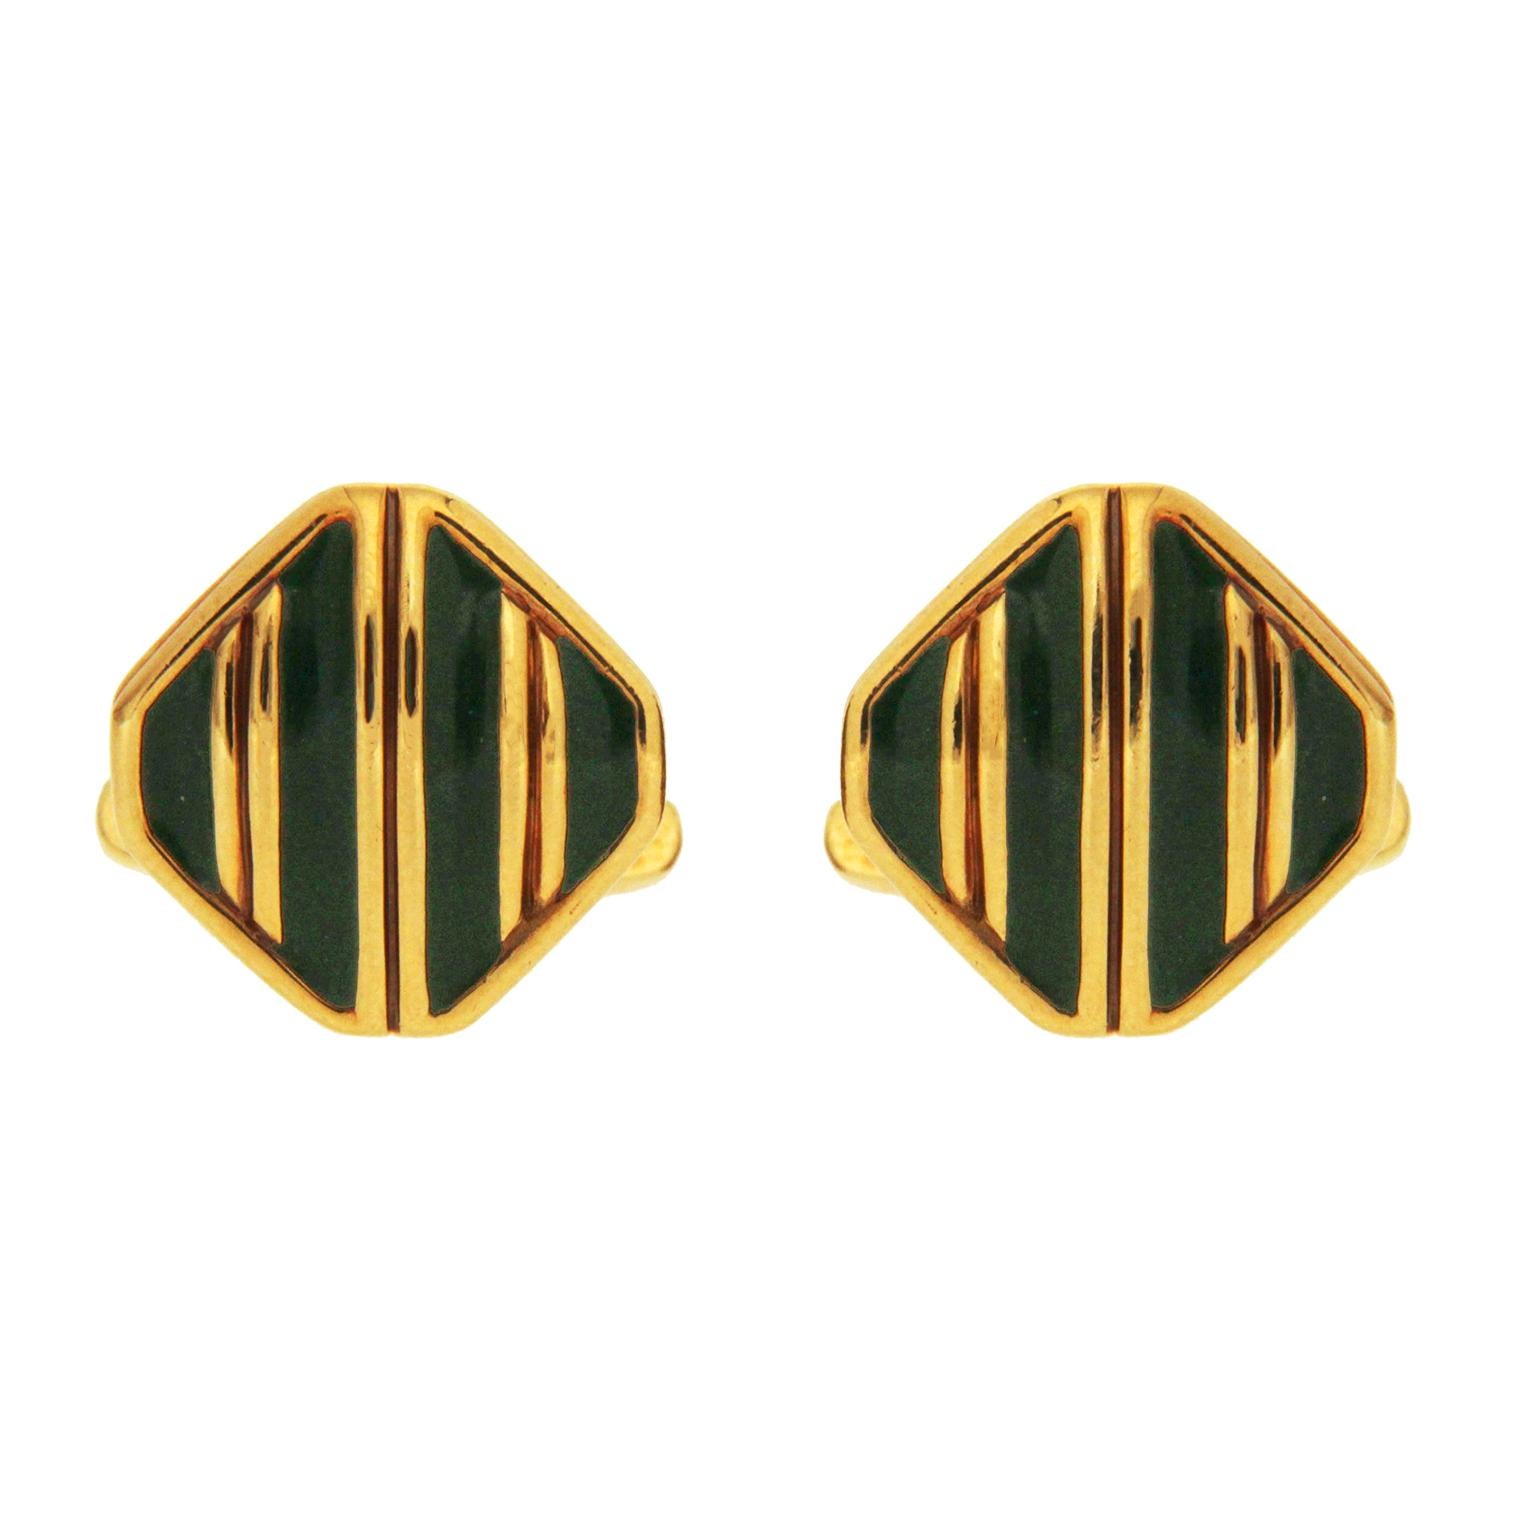 Valentin Magro Striped Green Enamel and Gold Cufflinks are accented with stripes. The body of these pieces are made of 18k yellow gold. On the front, dark green enamel provides background decoration. Diagonal gold stripes cross the front and a thin